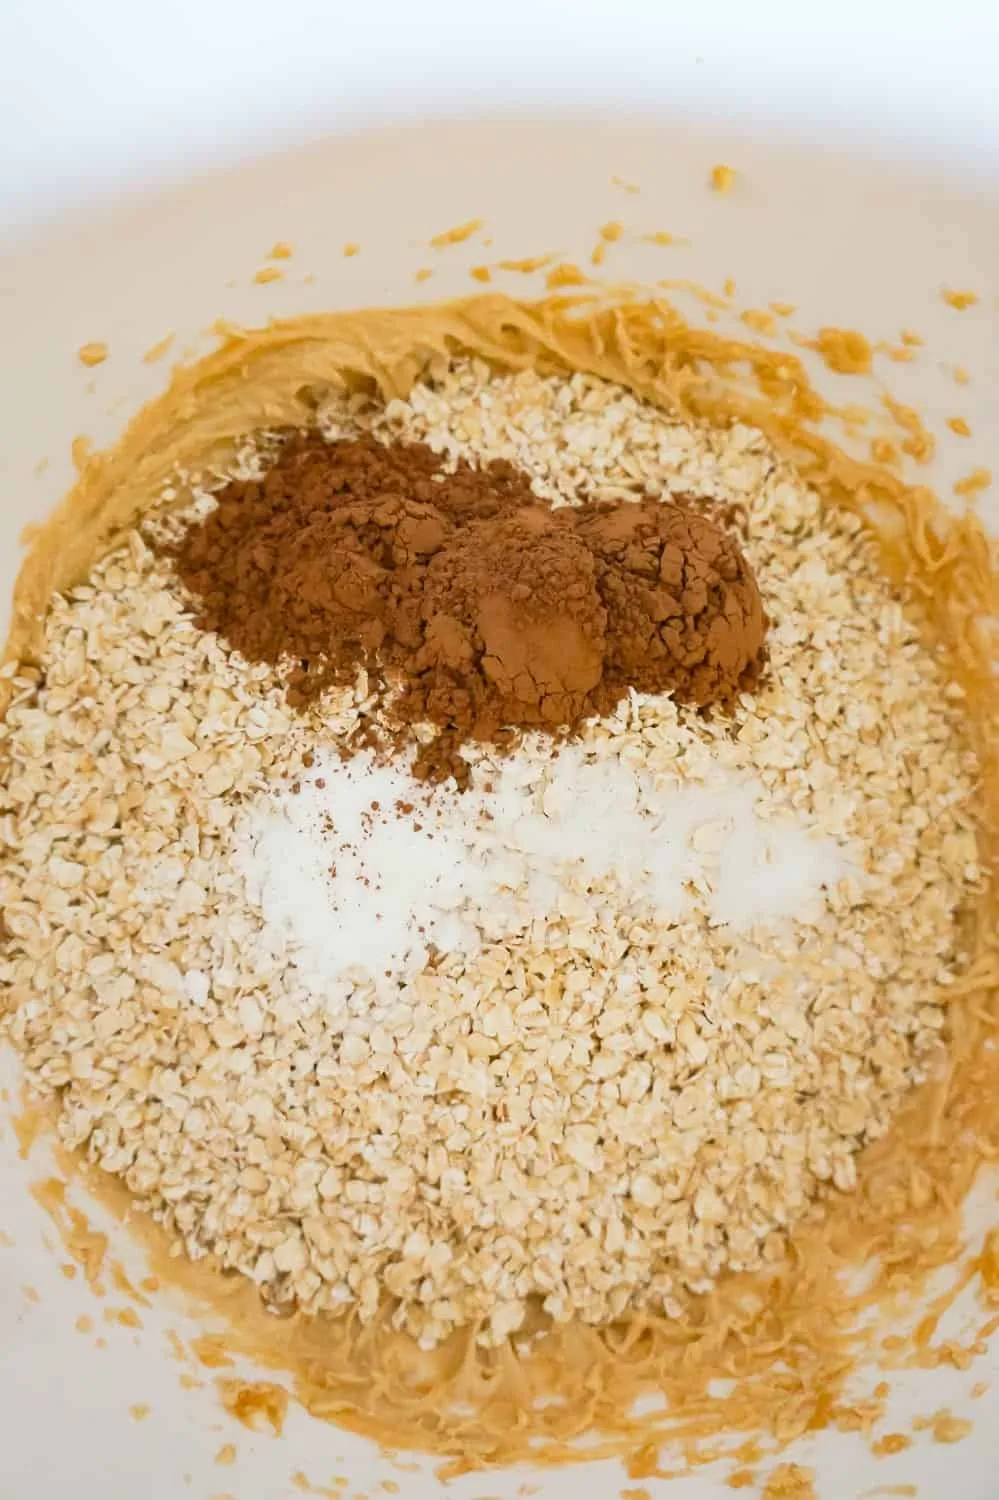 cocoa powder, baking powder and quick oats on top of creamy peanut butter mixture in a mixing bowl